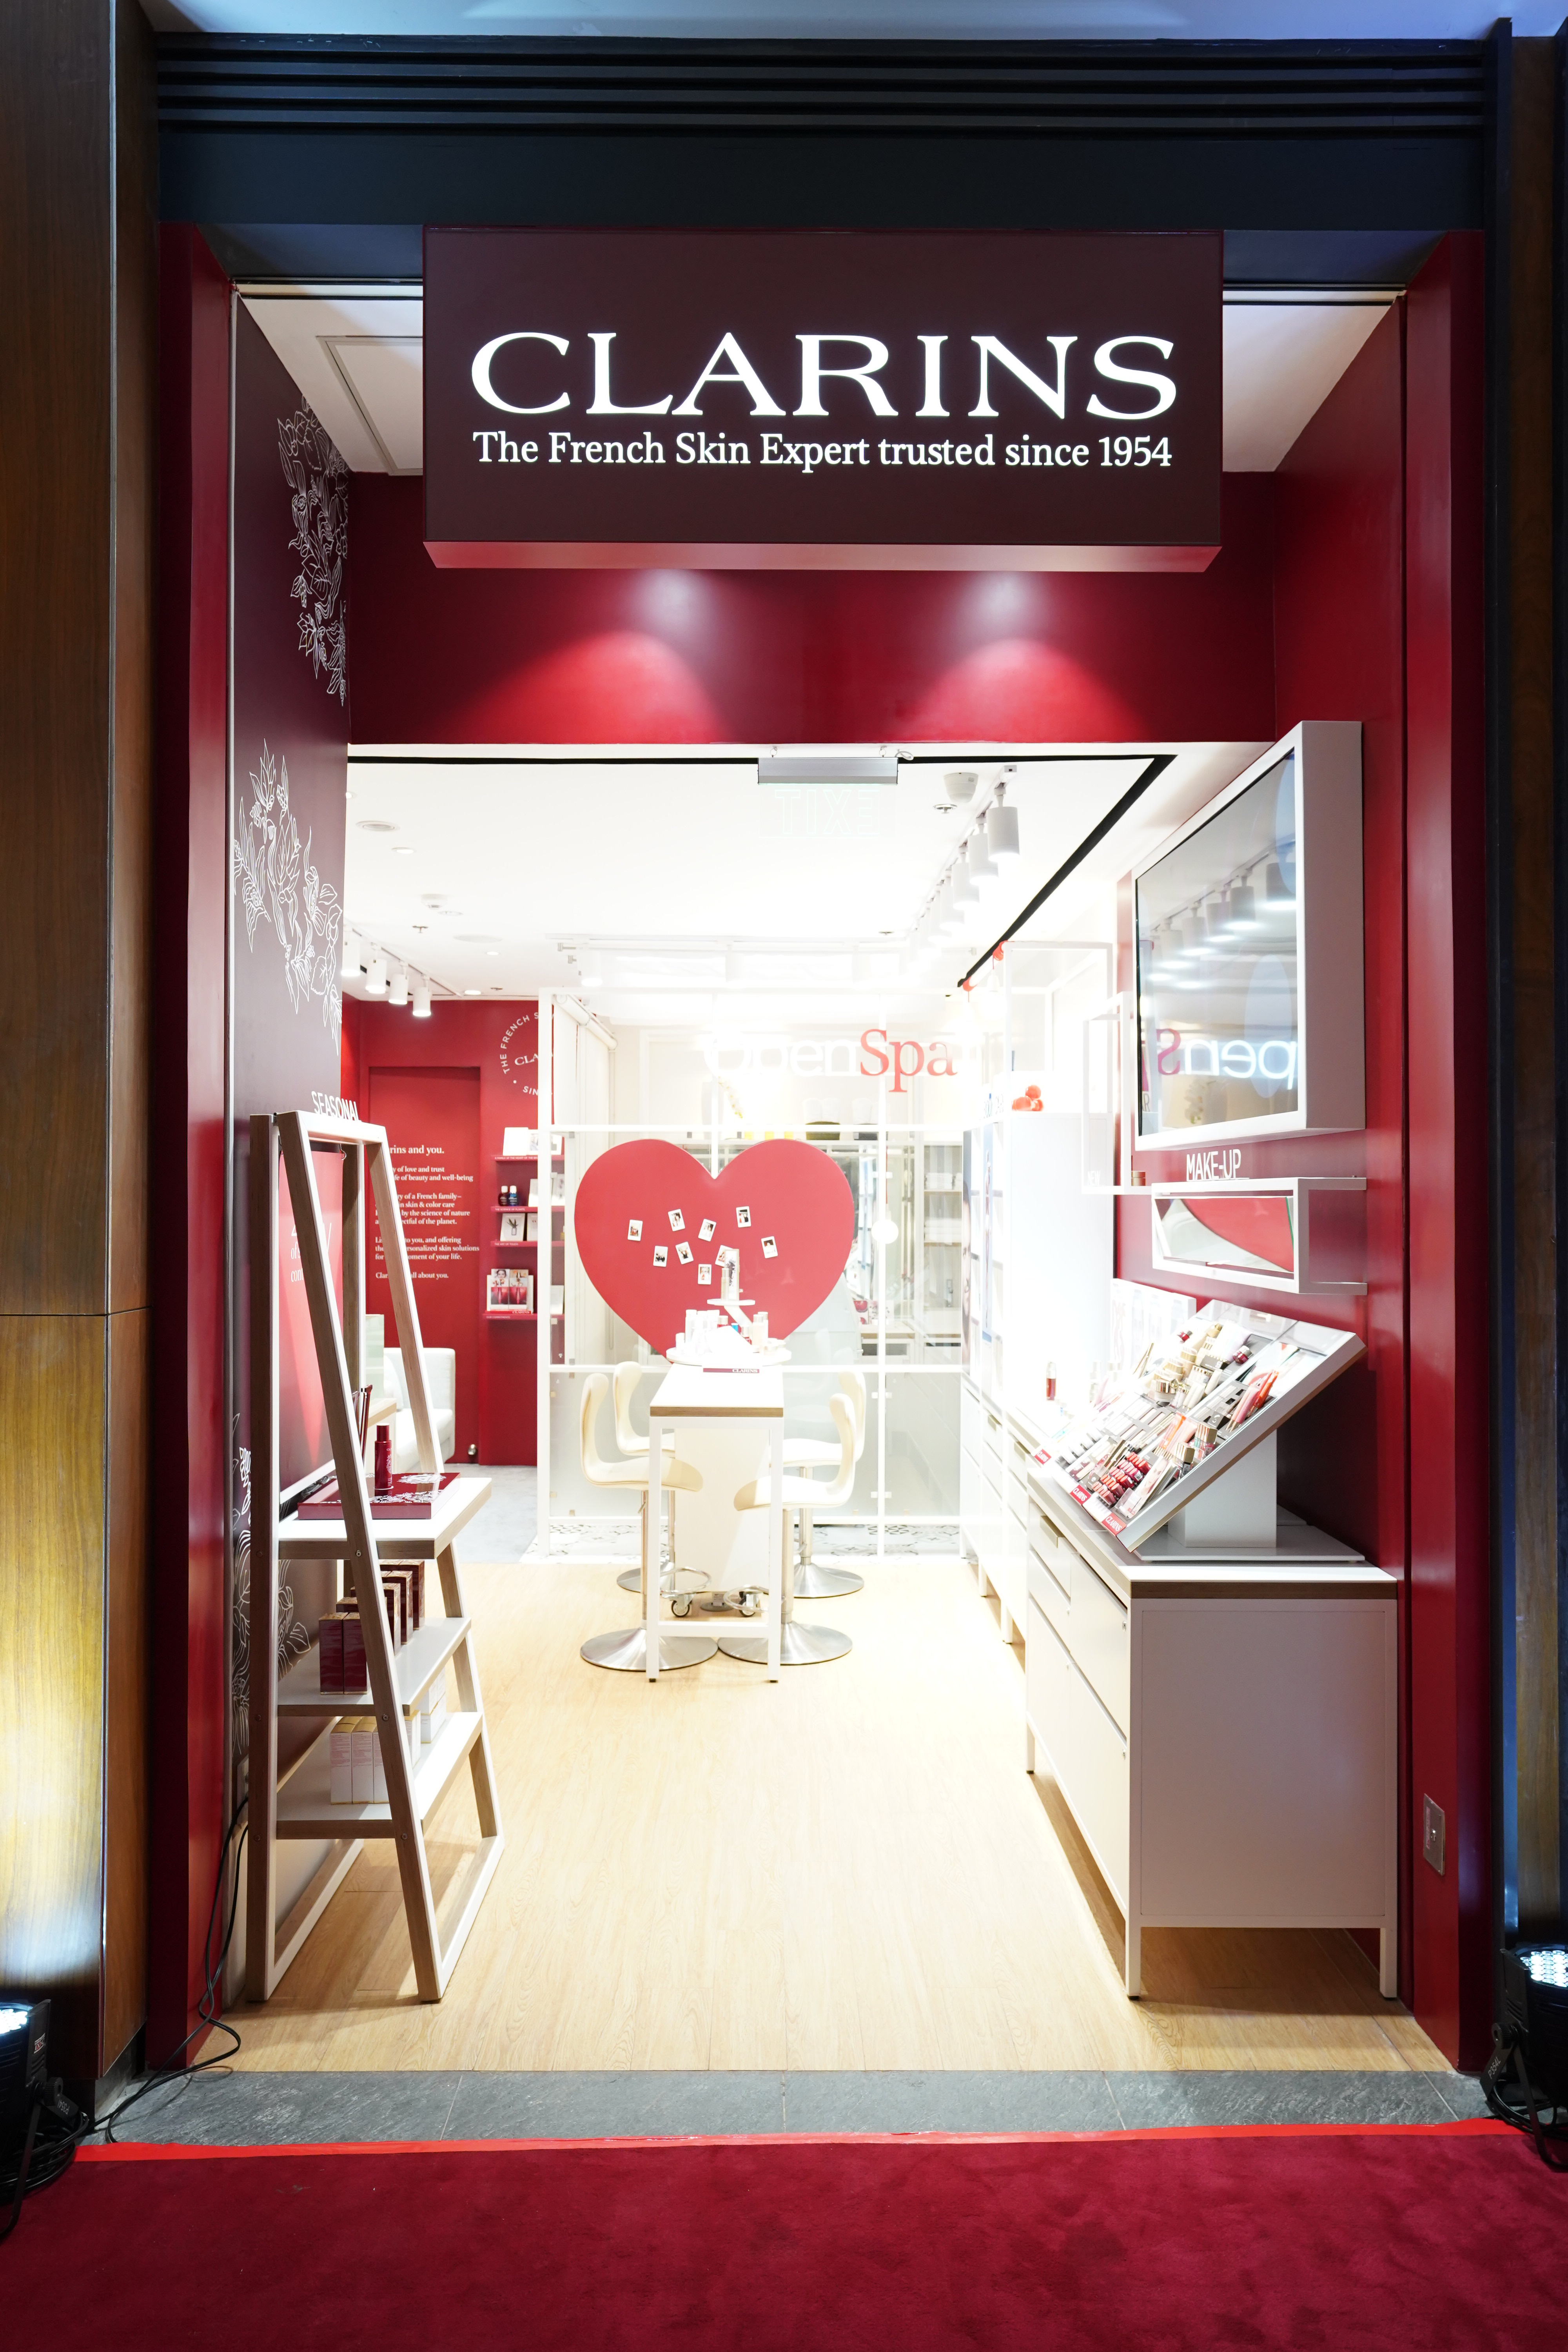 Get a quick but complete skincare treatment at Clarins Open Spa